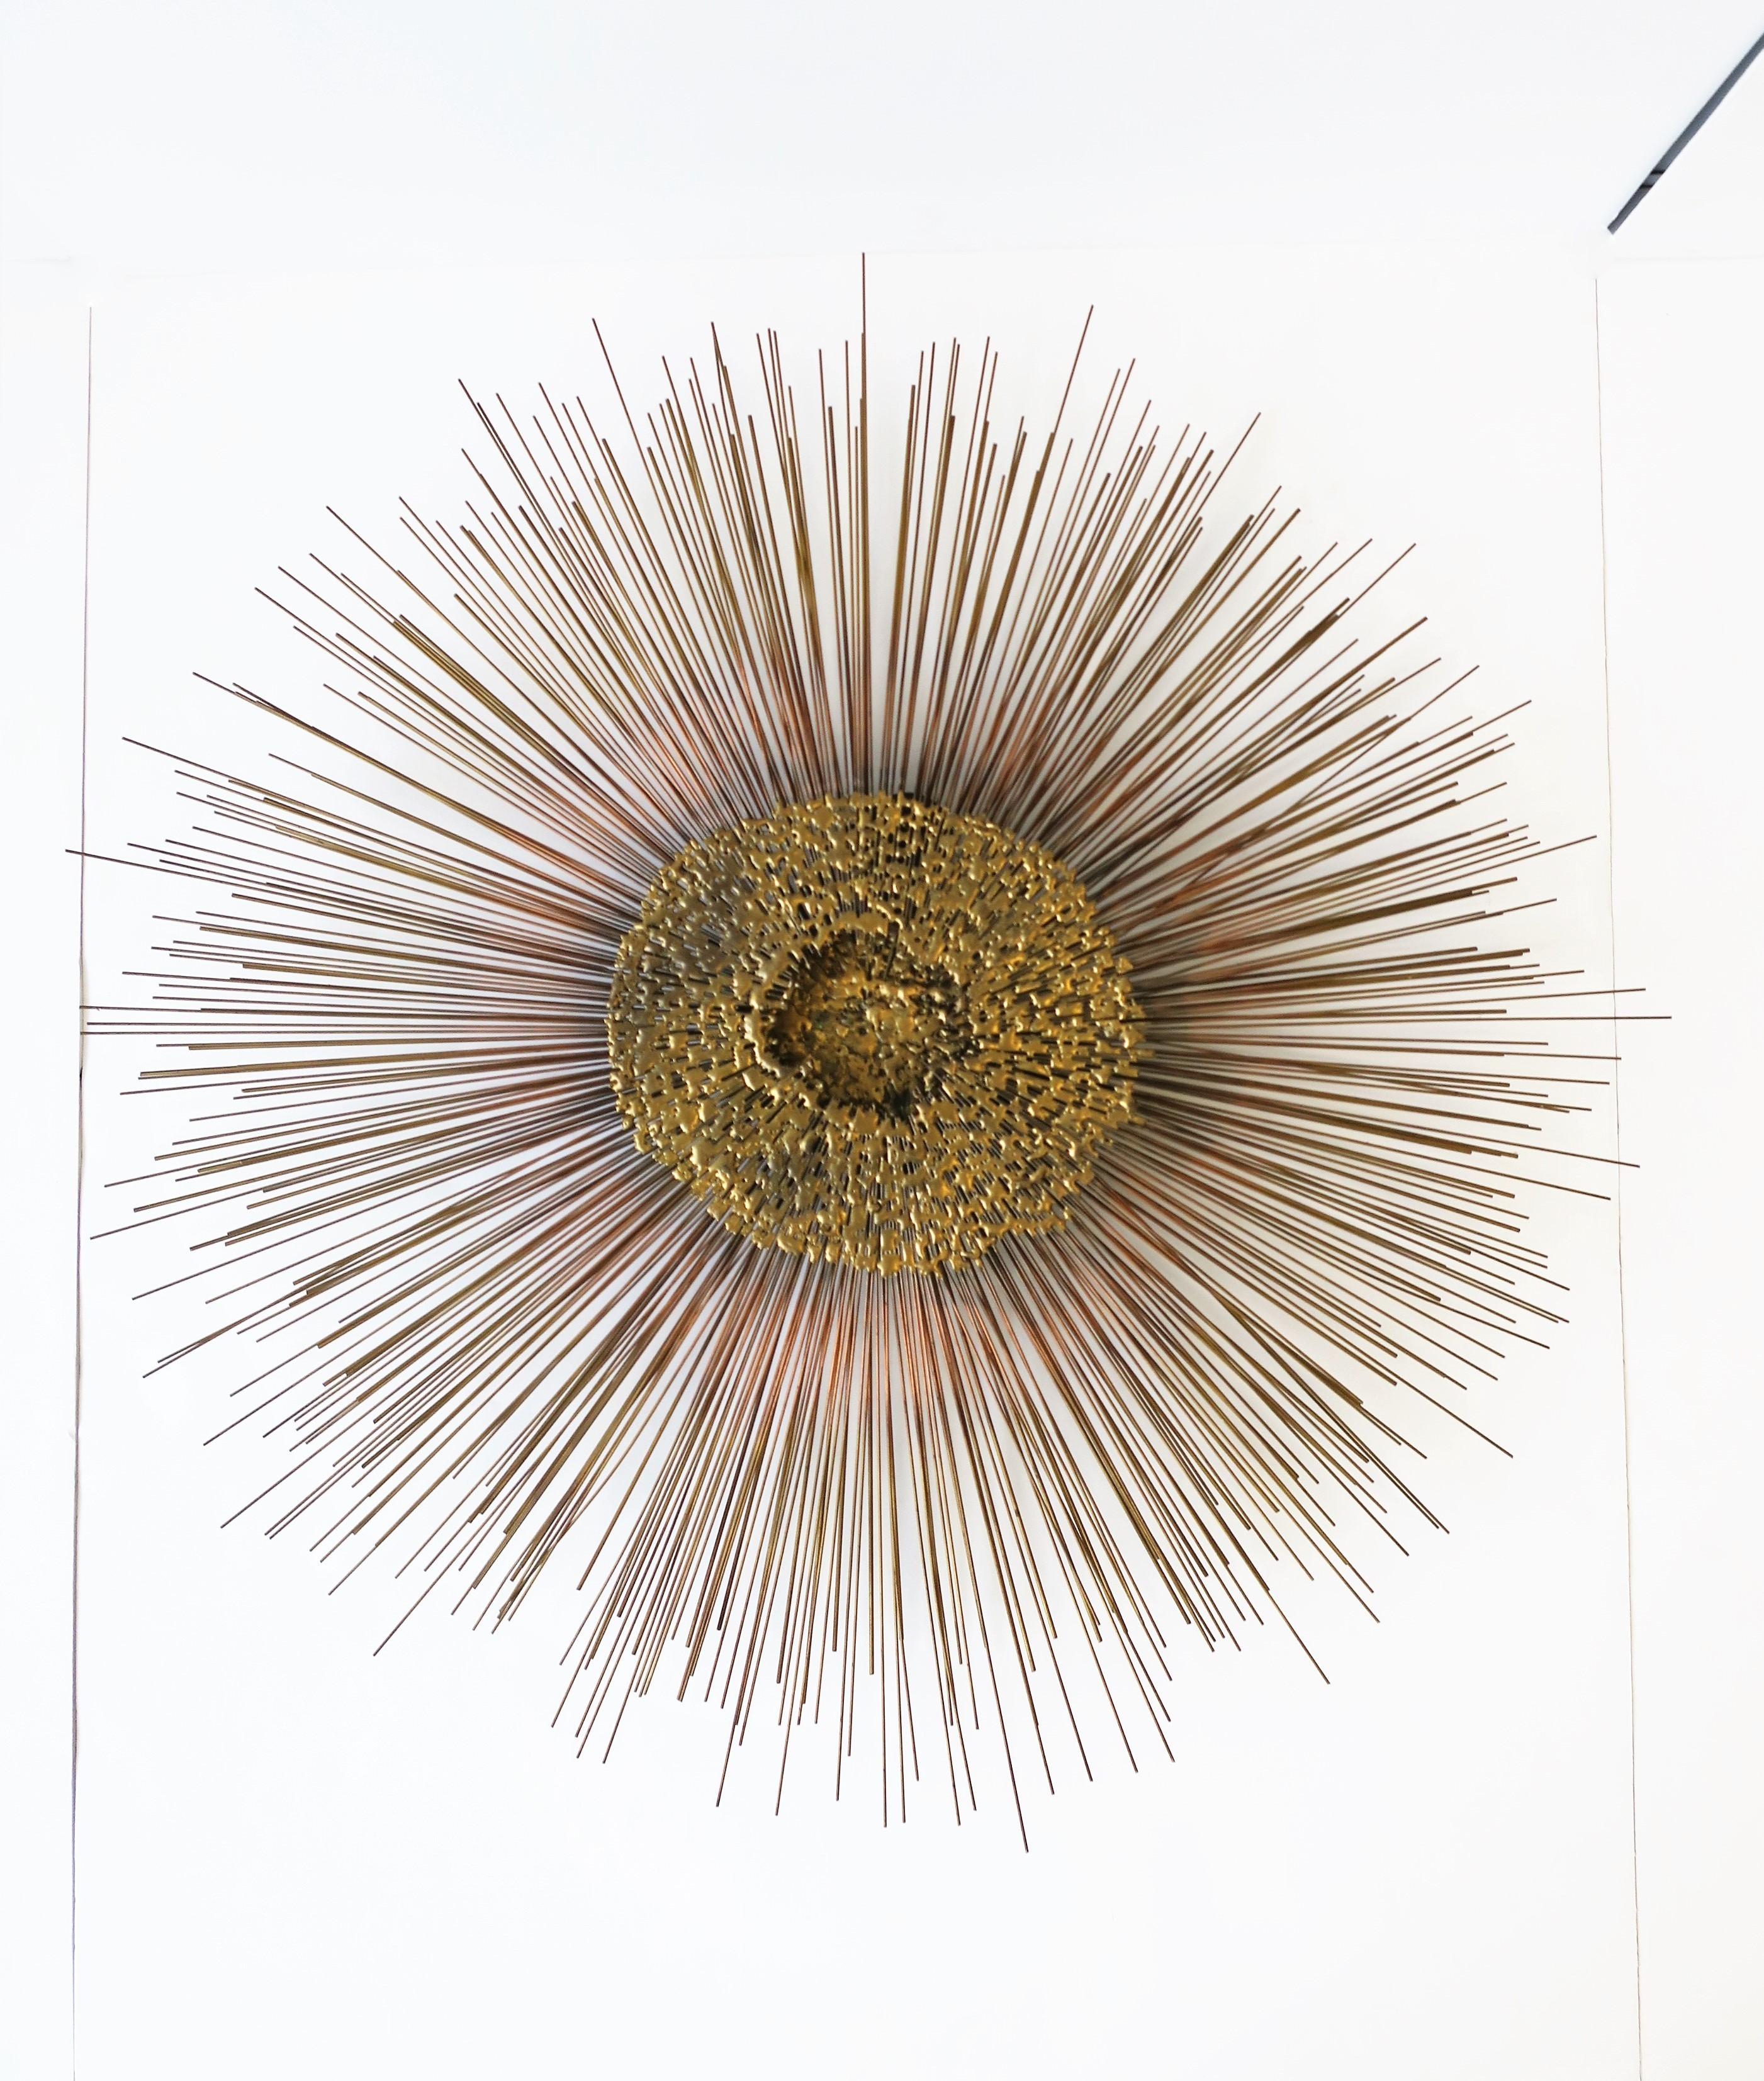 A substantial and well made modern late 1970s brass and bronze metal wall art sculpture piece made by designer Friedle, late 20th century, circa late 1970s, USA. This modern metal starburst sculpture, by Bruce and William Friedle, brothers and